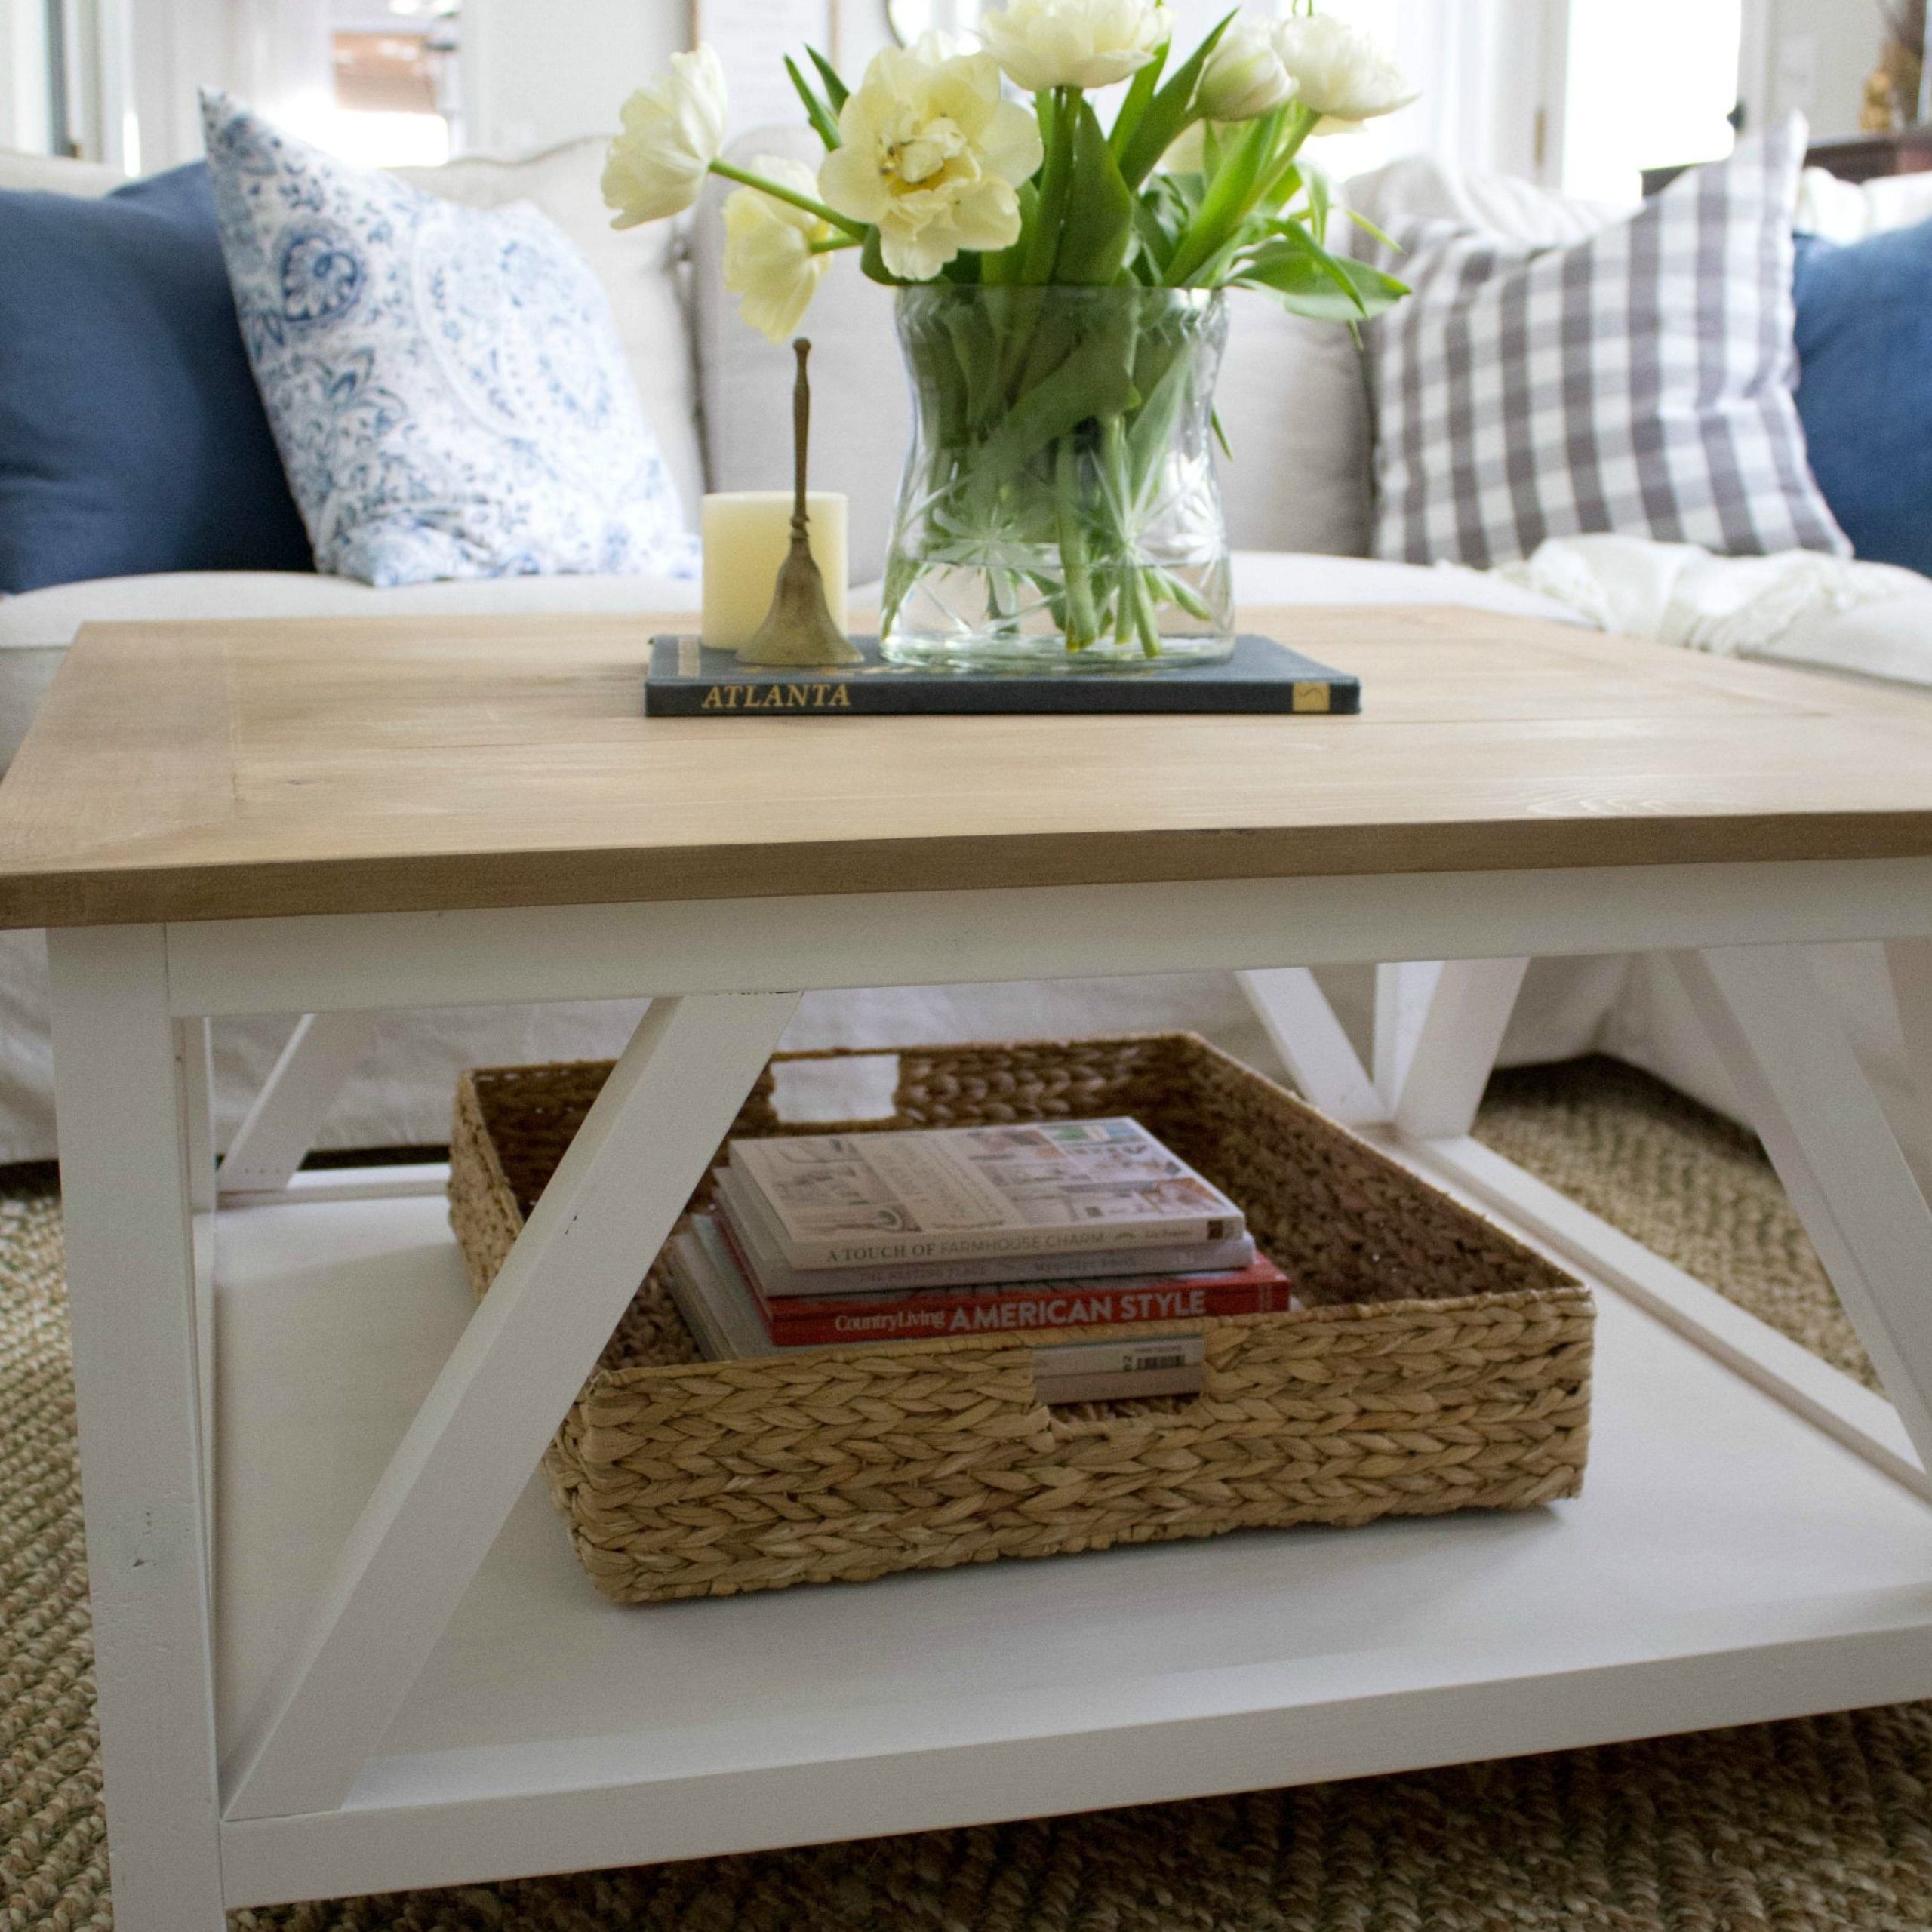 Luxus Modern Farmhouse Coffee Table Ideas – Home Inspiration With Regard To Coffee Tables For 4 6 People (View 17 of 20)